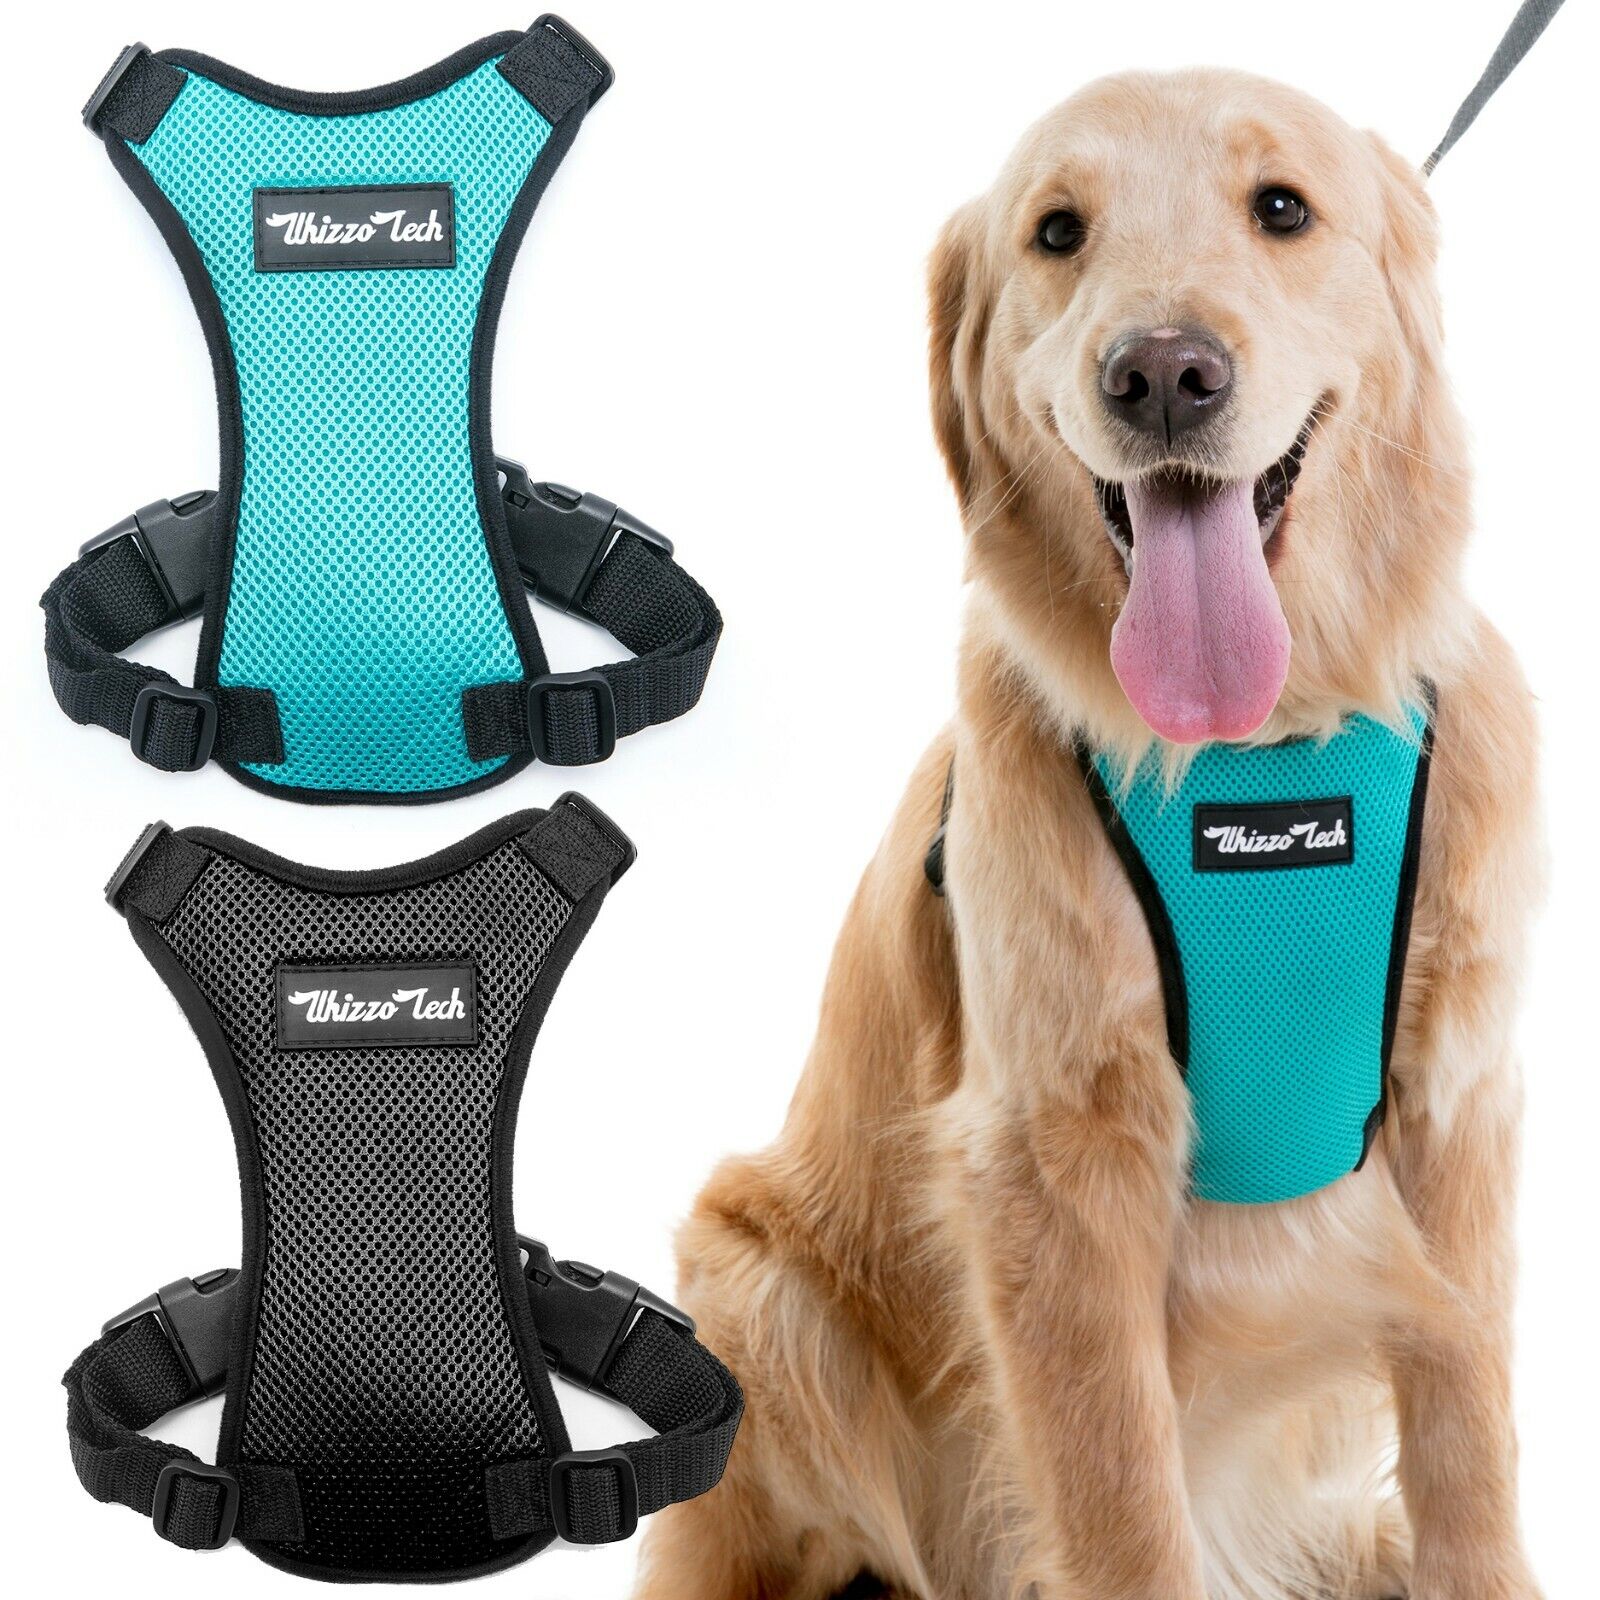 Dog Harness No-Pull Pet Adjustable Outdoor Pet Vest for Small Medium Large Dogs